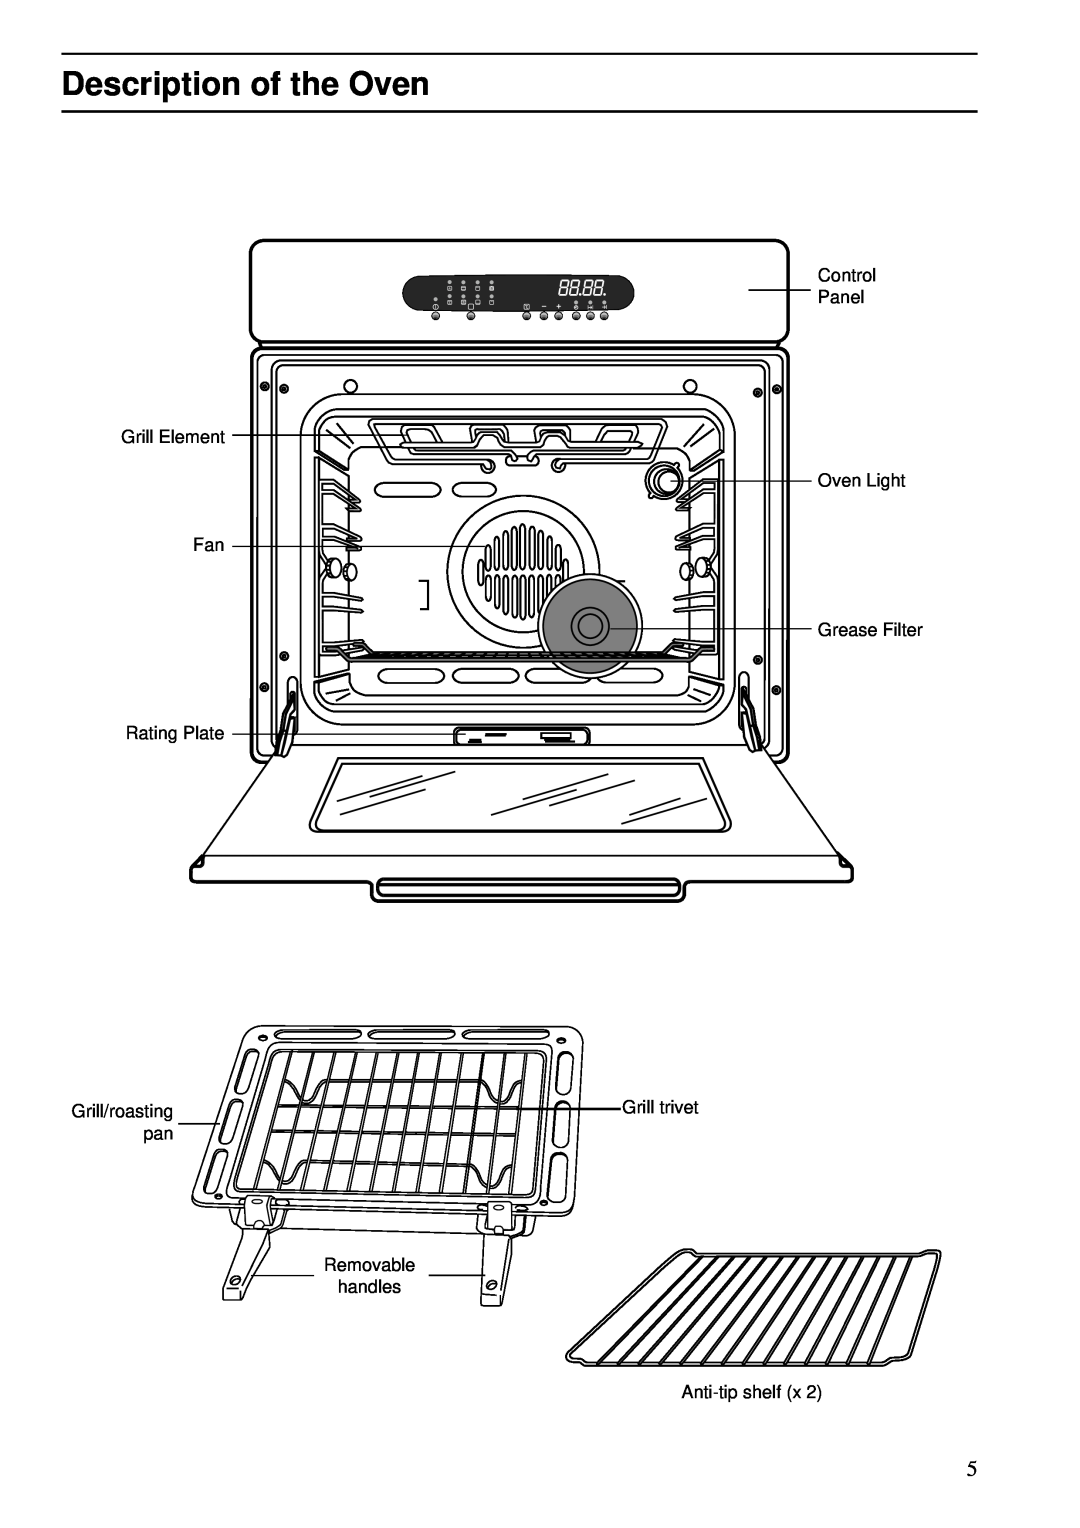 Zanussi ZBS 772 manual Description of the Oven, Grill Element Fan Rating Plate Grill/roasting pan, Anti-tip shelf 